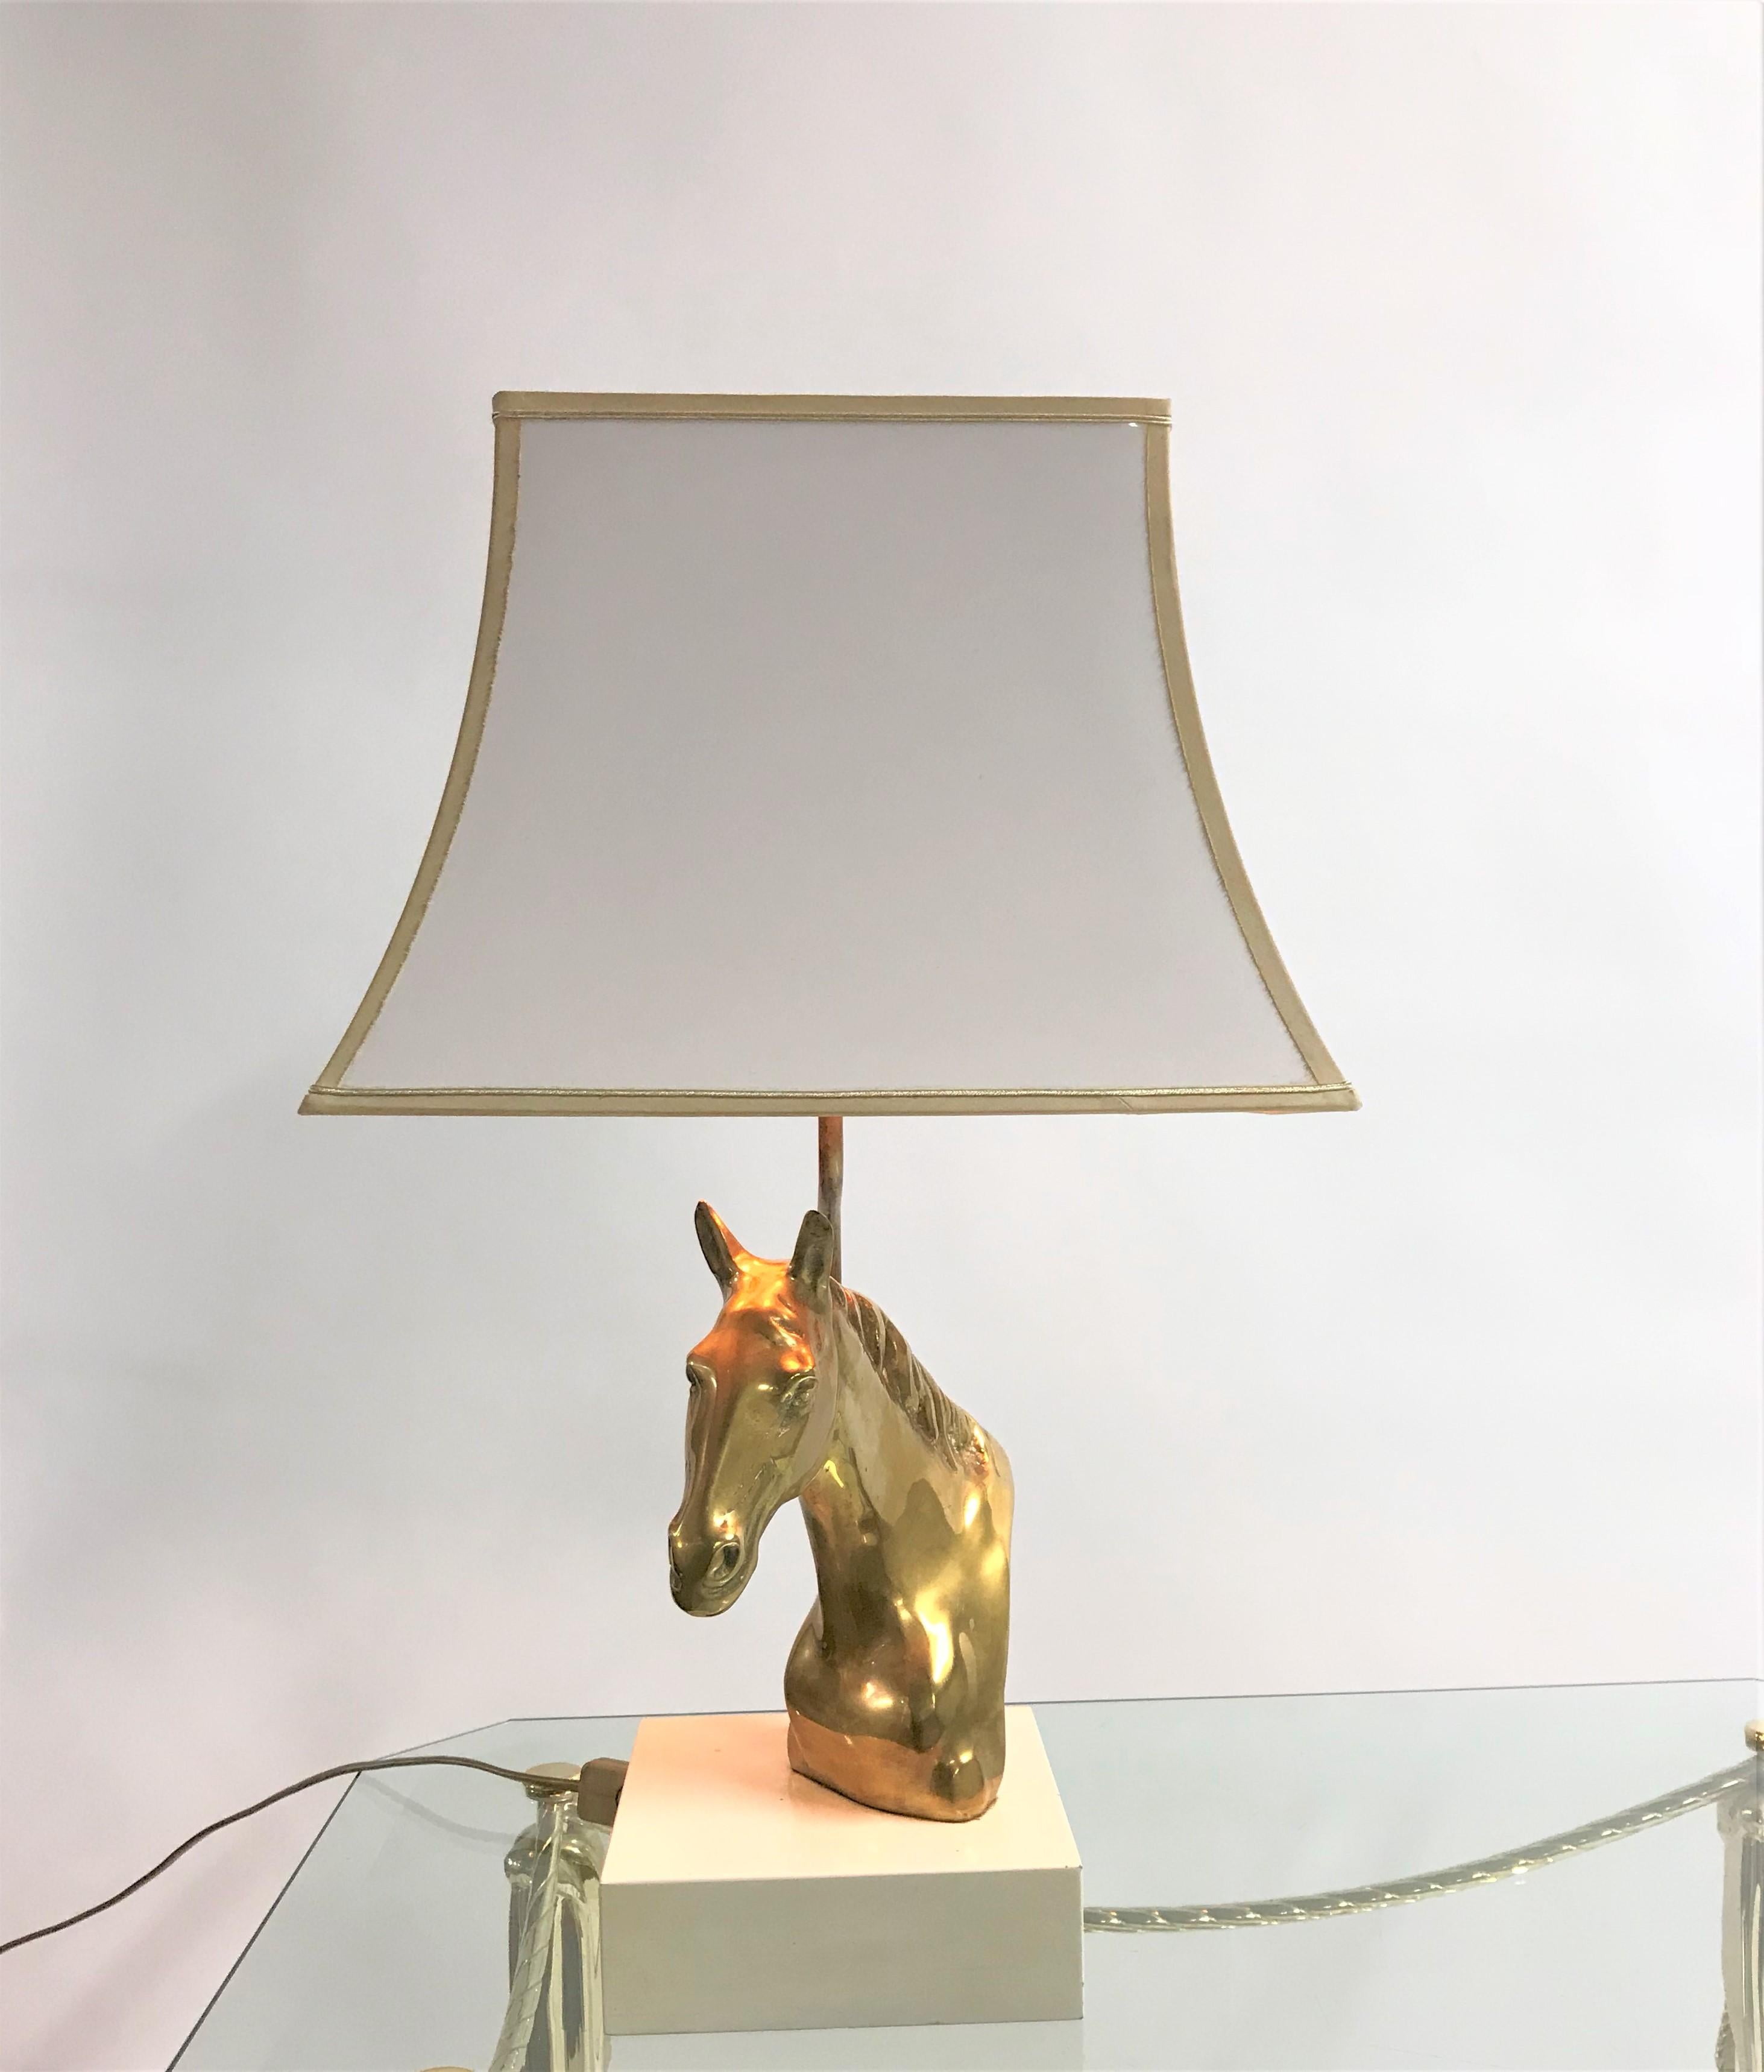 Heavy brass horse head table lamp in the style of Maison Jansen.

The brass horse head is mounted on a white lacquered wooden base and topped with a beautiful white lacquered shade with a golden finish.

Stylish table lamp with a luxurious